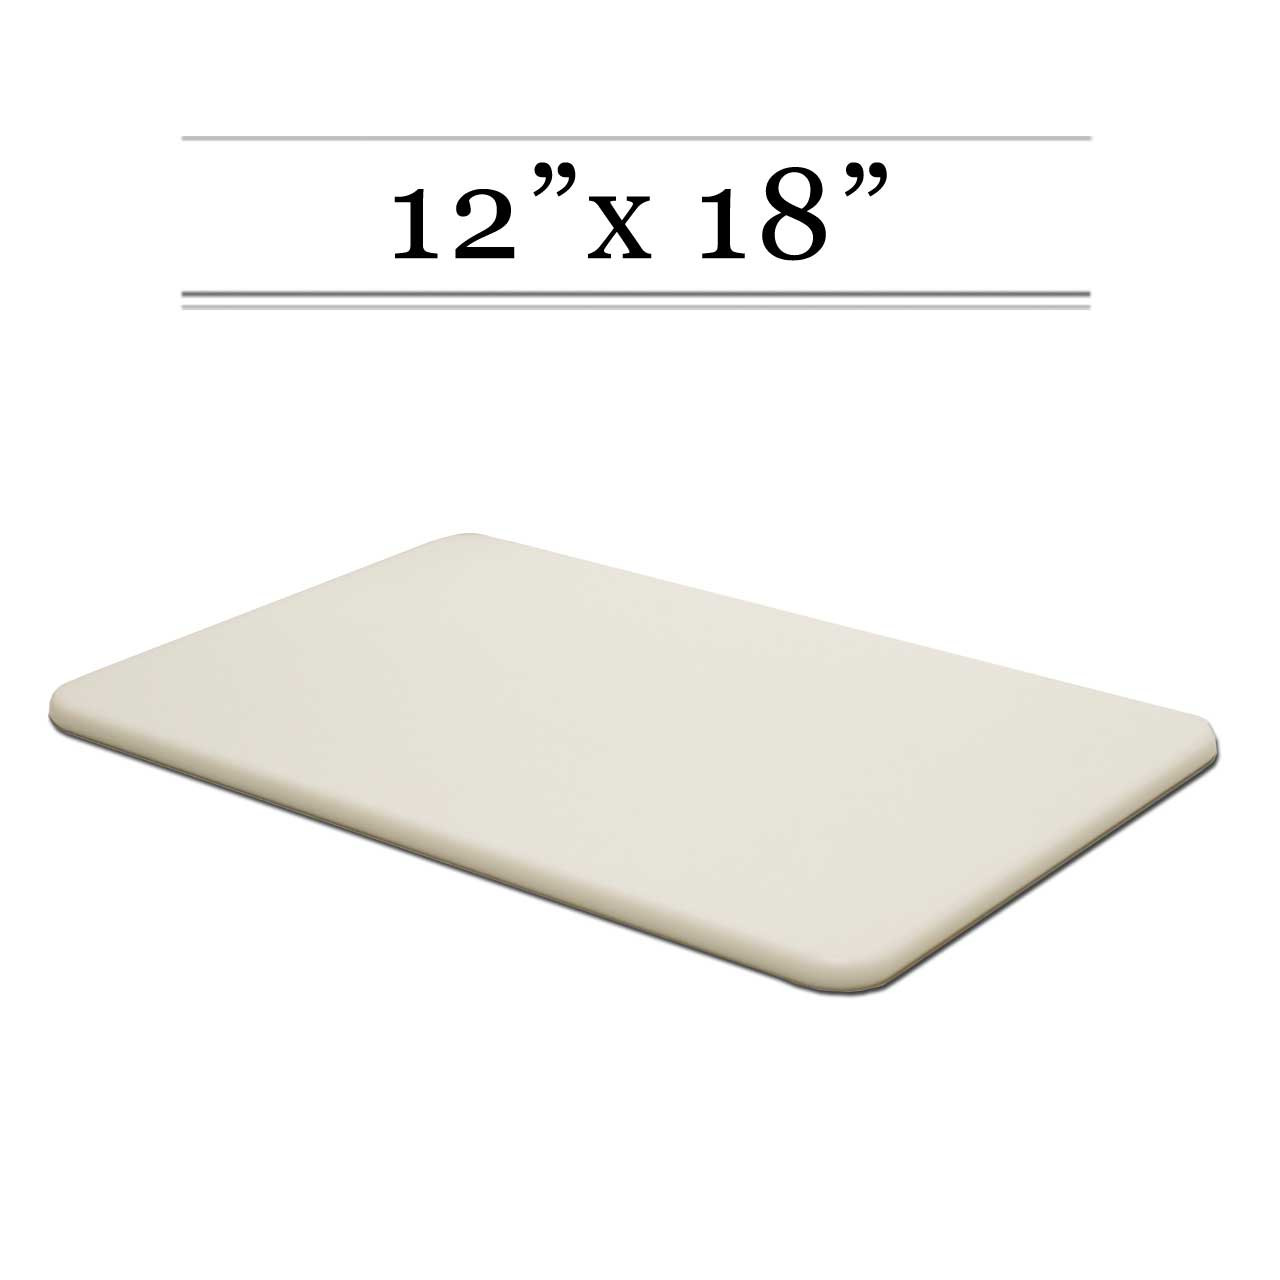 Commercial White Plastic HDPE Cutting Board, NSF Certified - 18 x 12 x 1/2